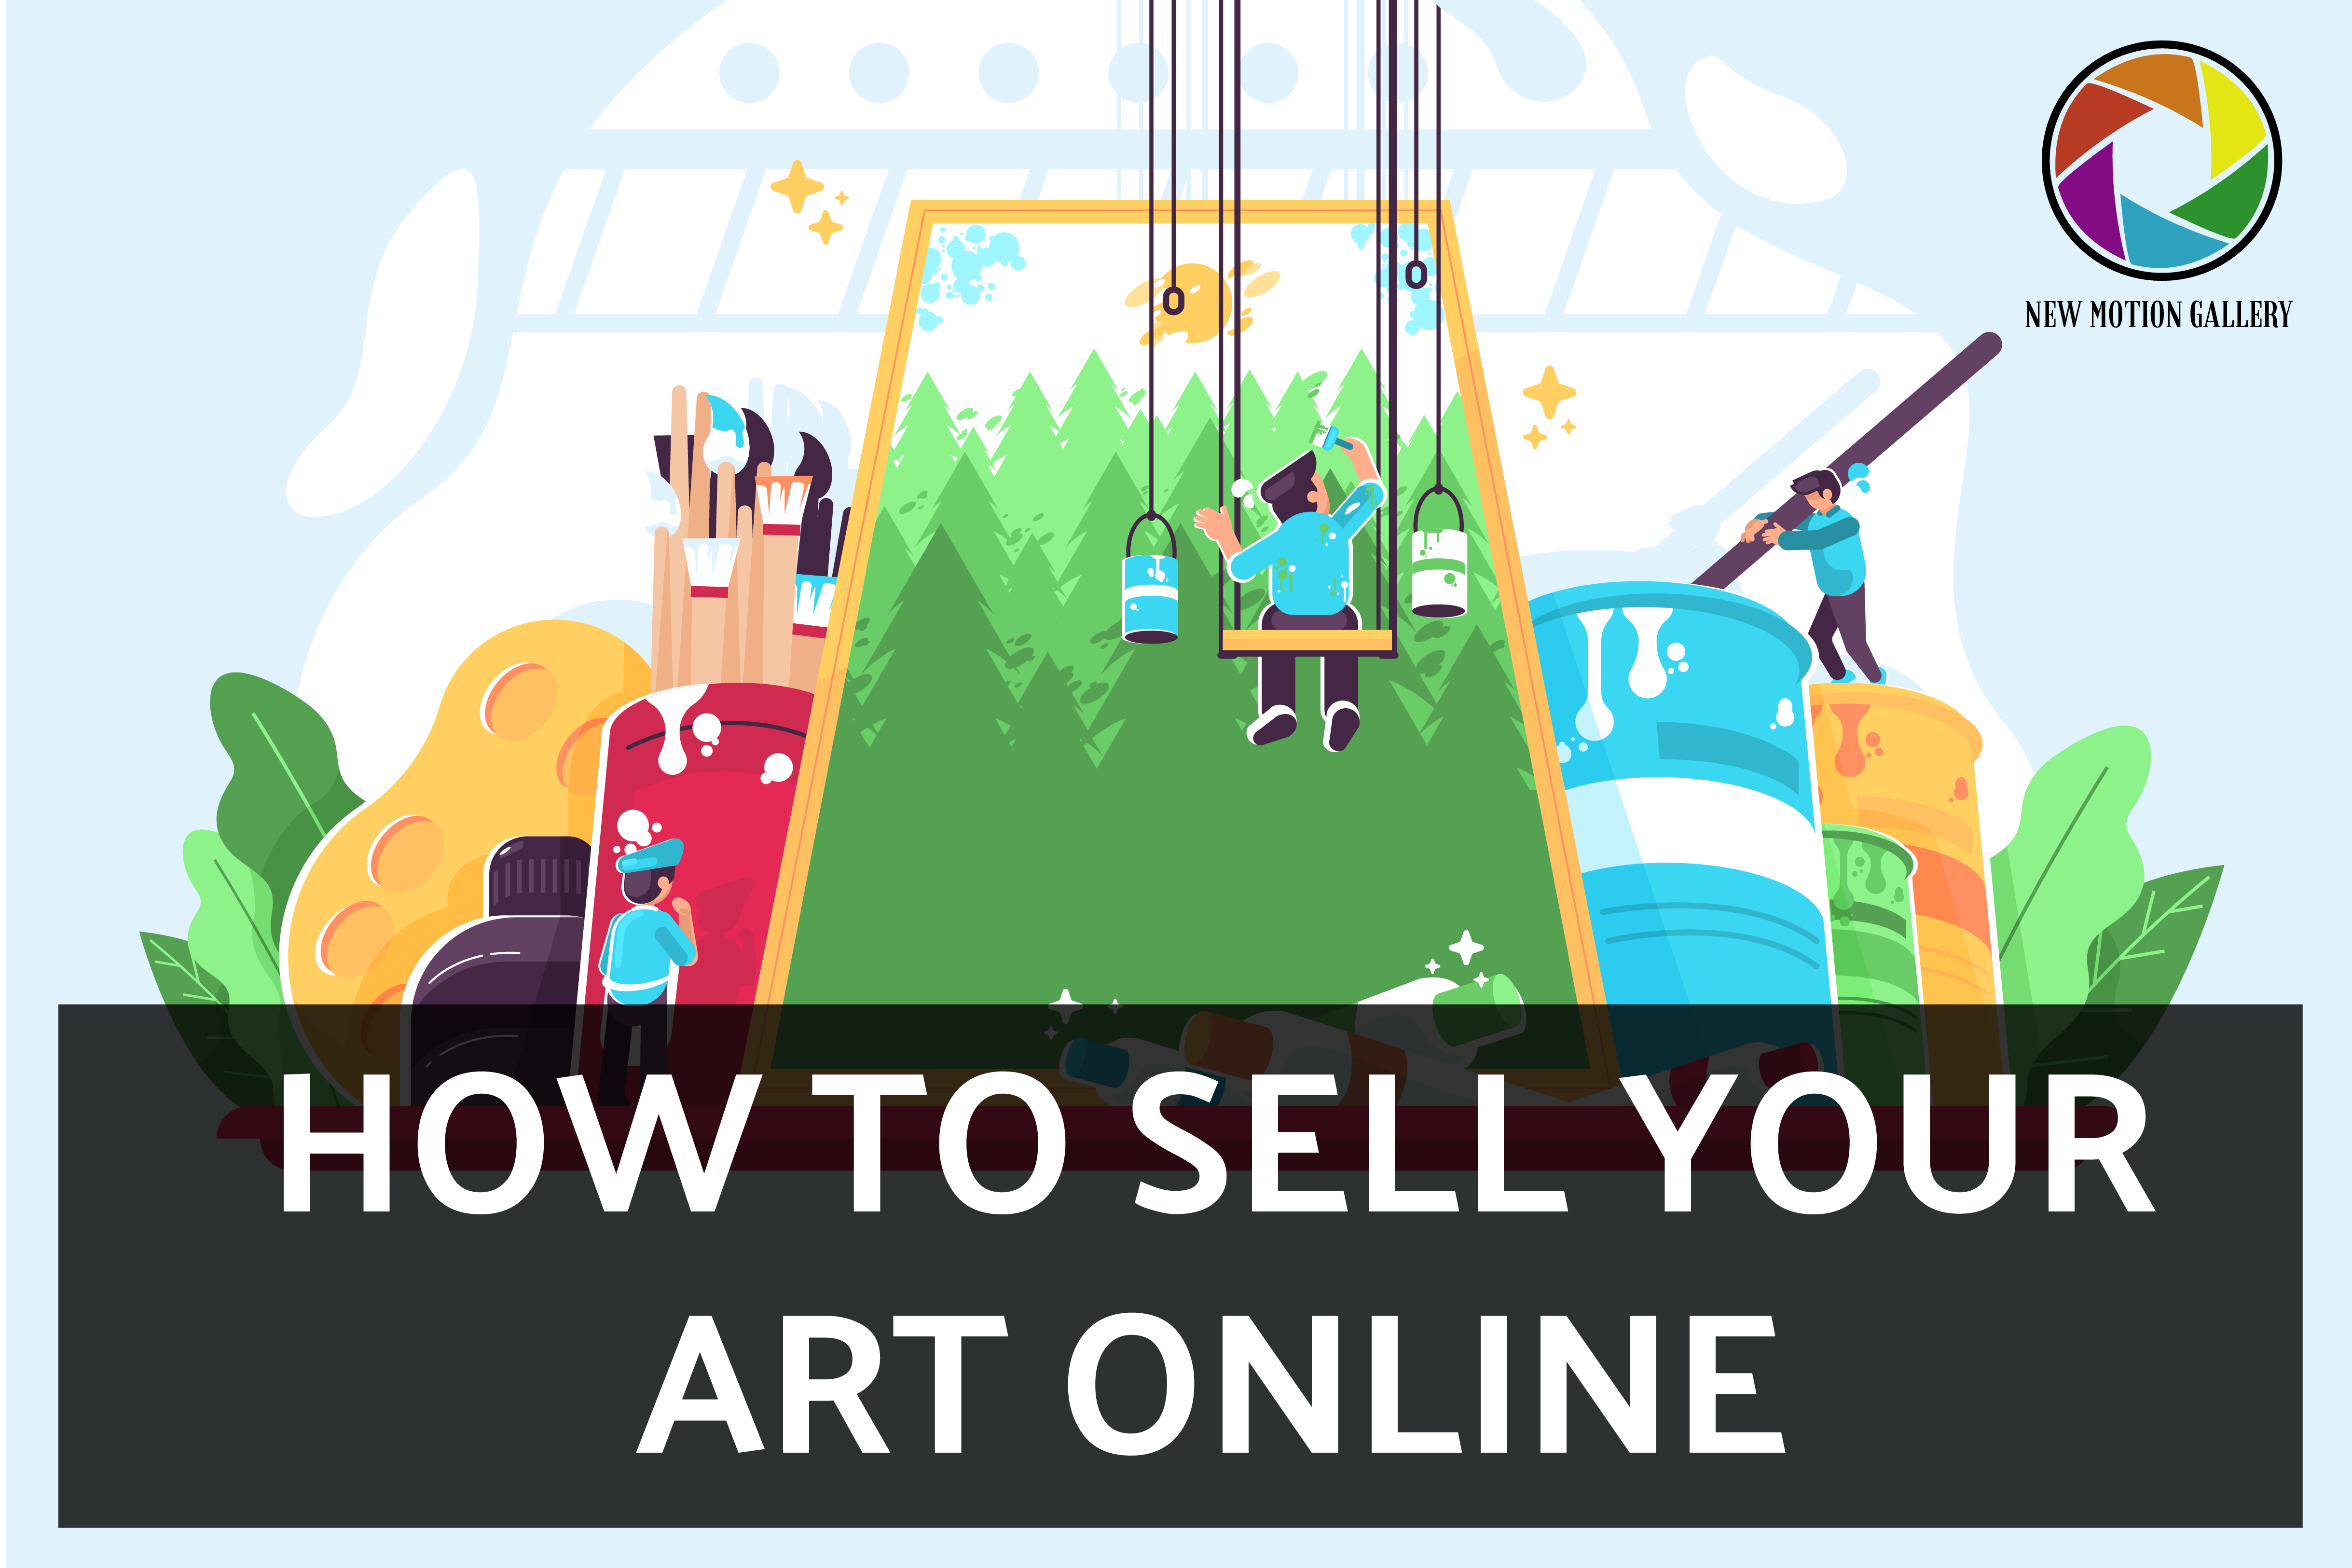 Promo image for How to Sell Your Art Online promo – New Motion Gallery